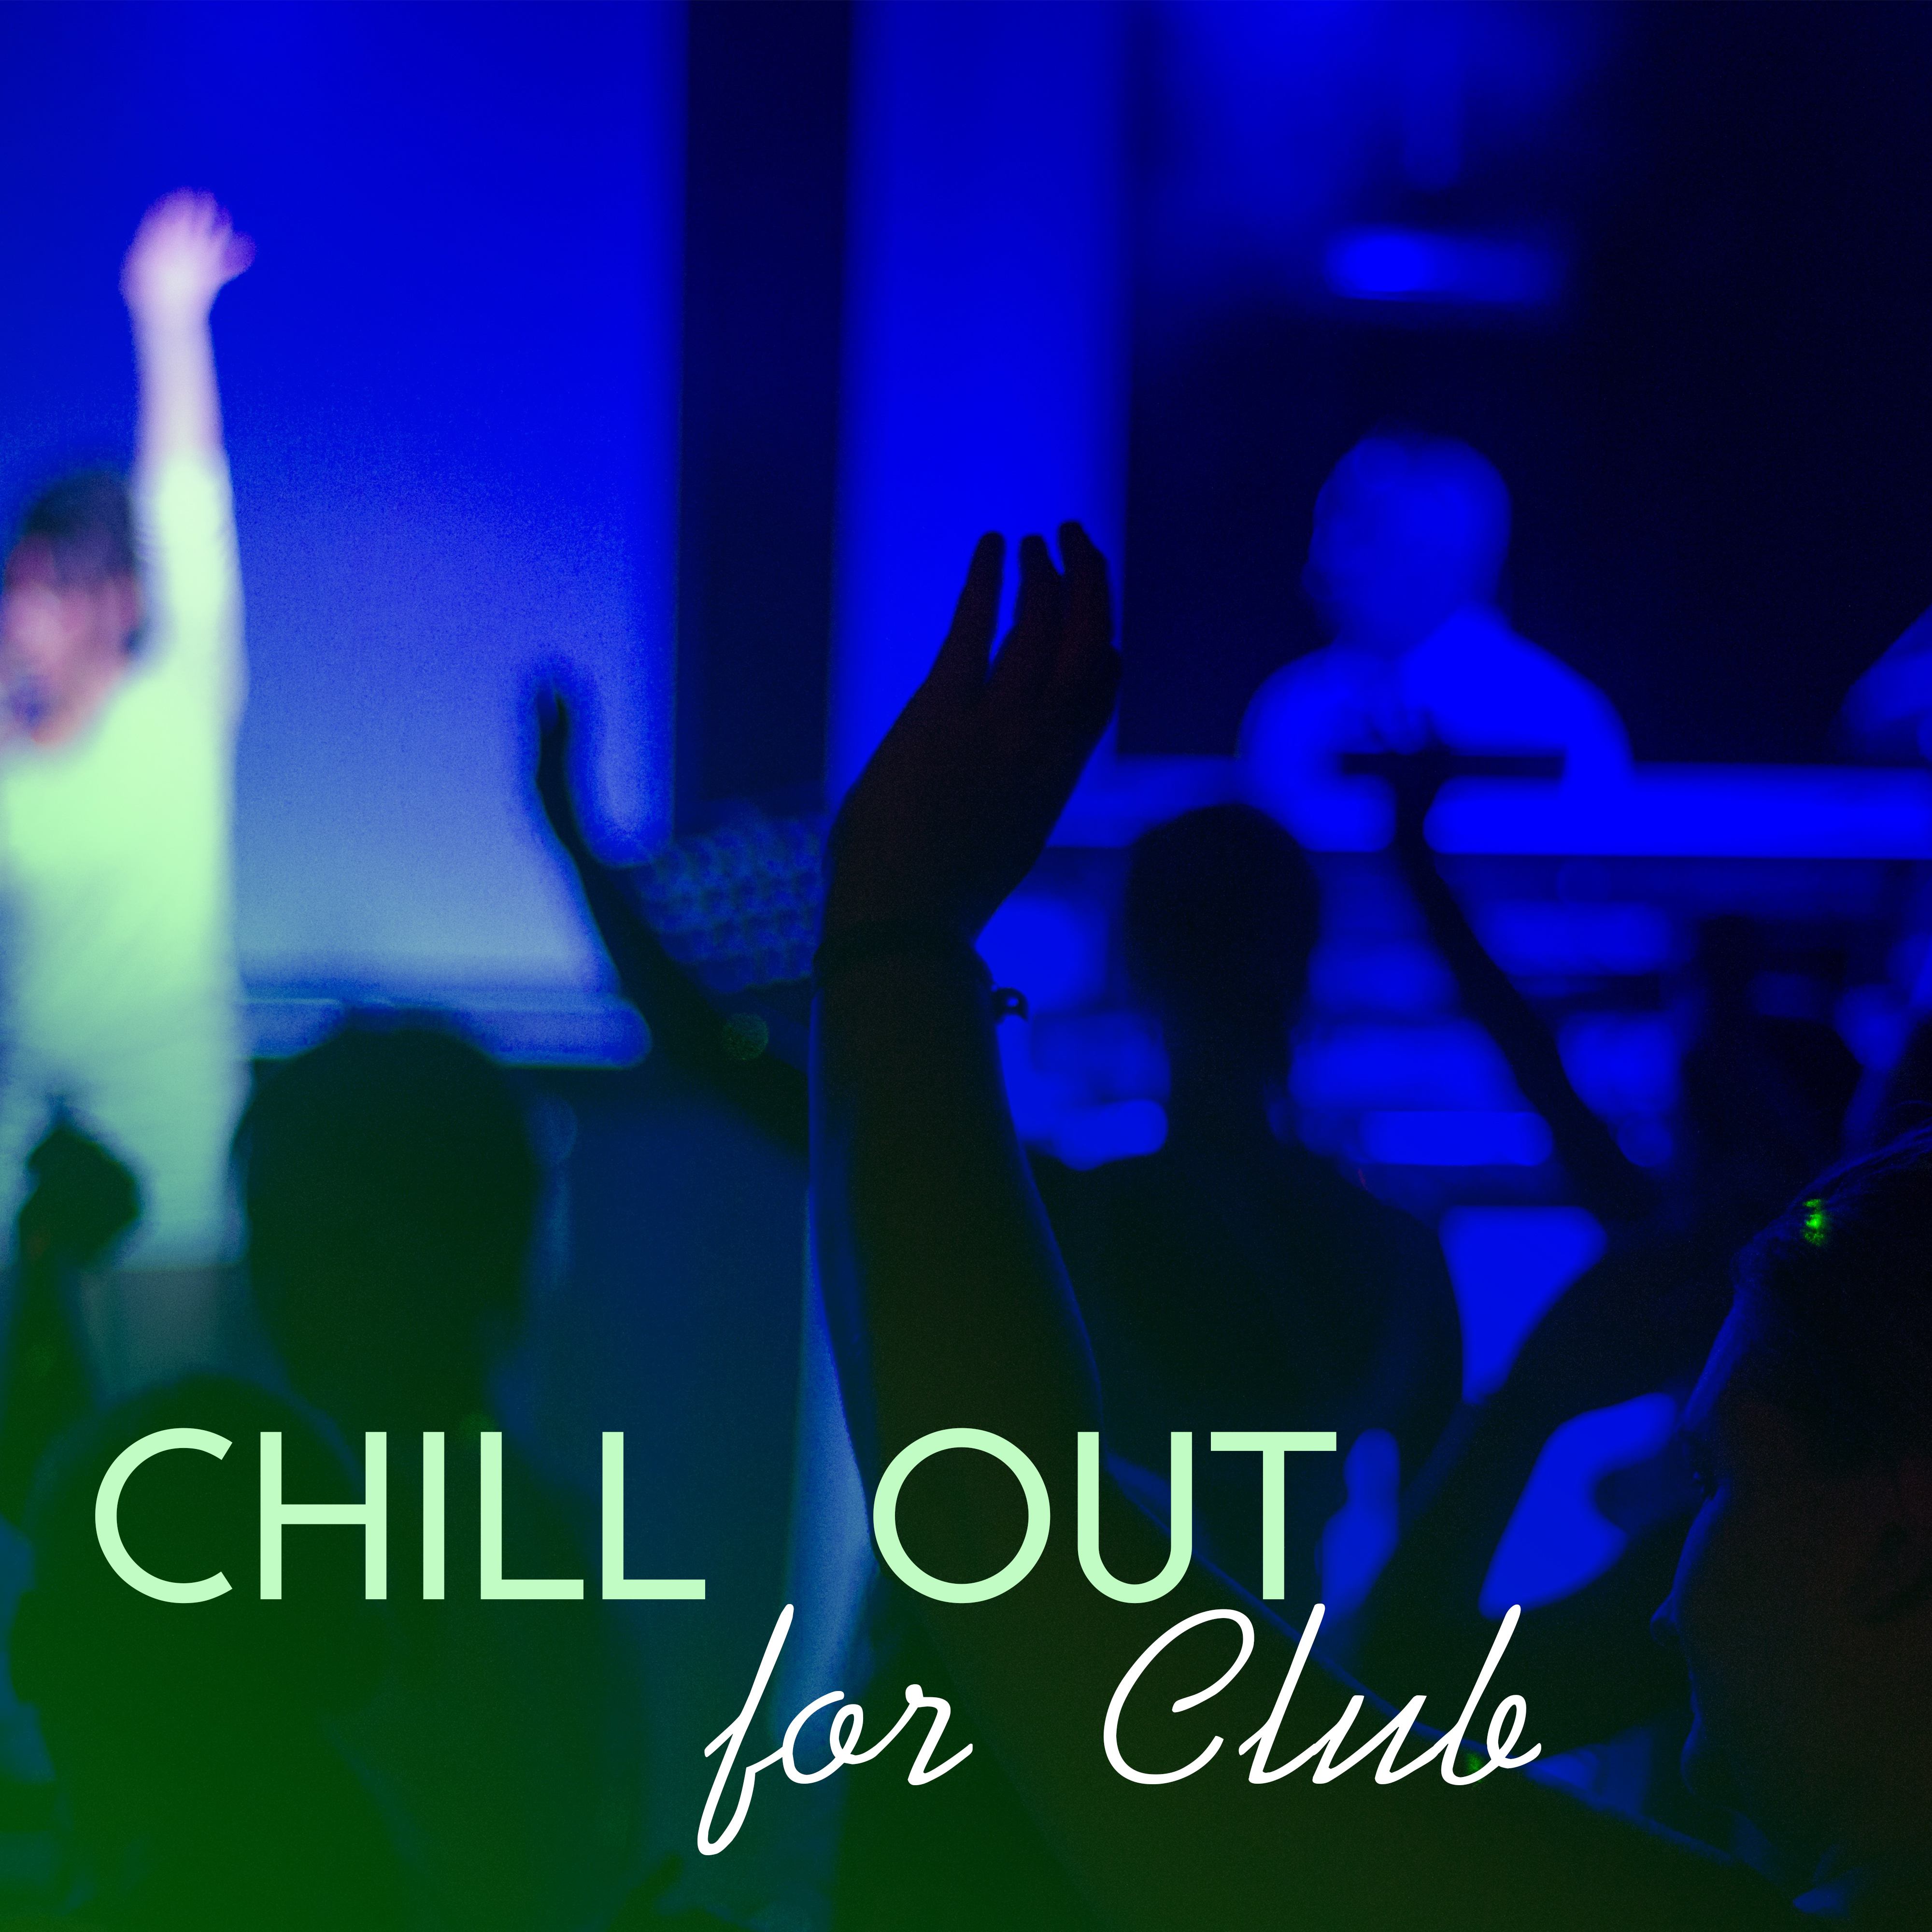 Chill Out for Club  Best Party Chill Out, Music to Have Fun, Drinks  Cocktails, Fun All Night,  Dance